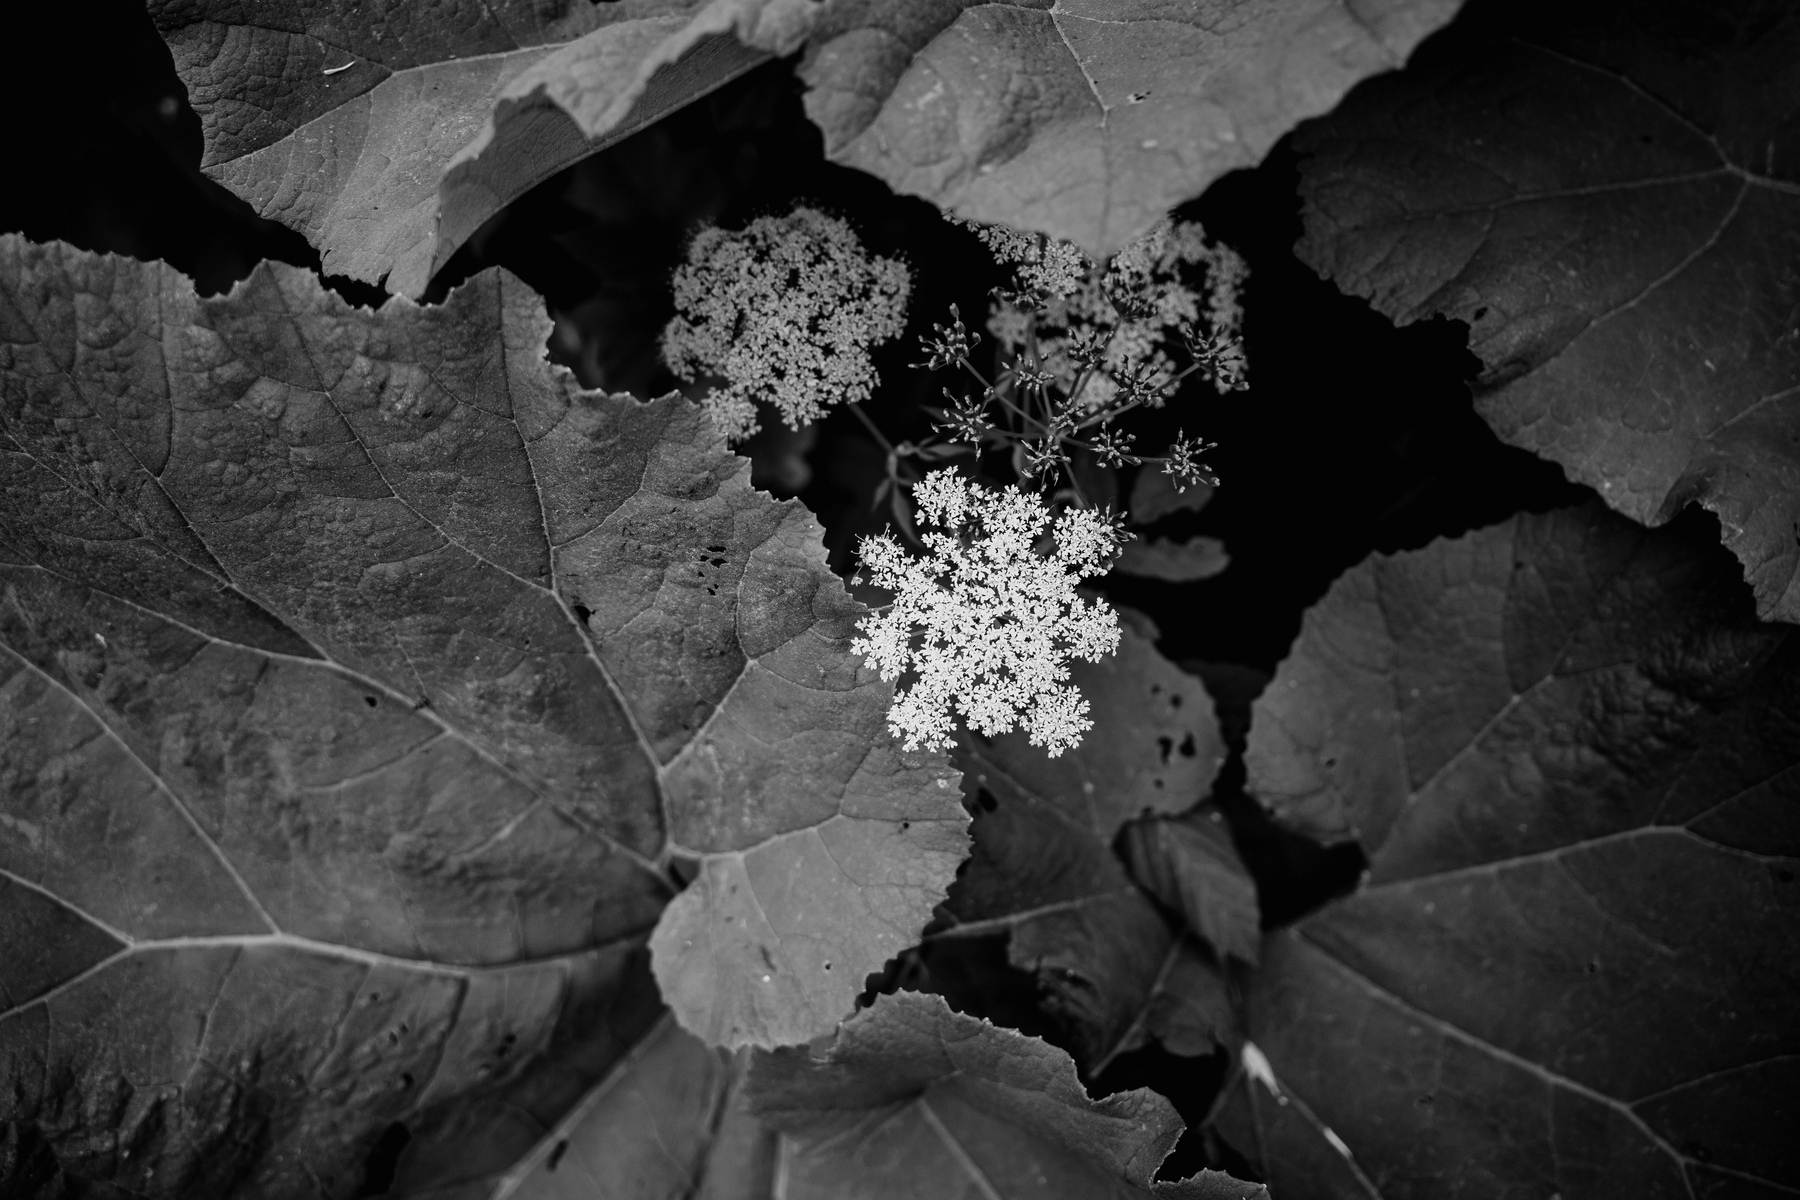 The image shows a cluster of delicate white flowers surrounded by large, dark leaves, all captured in black and white.